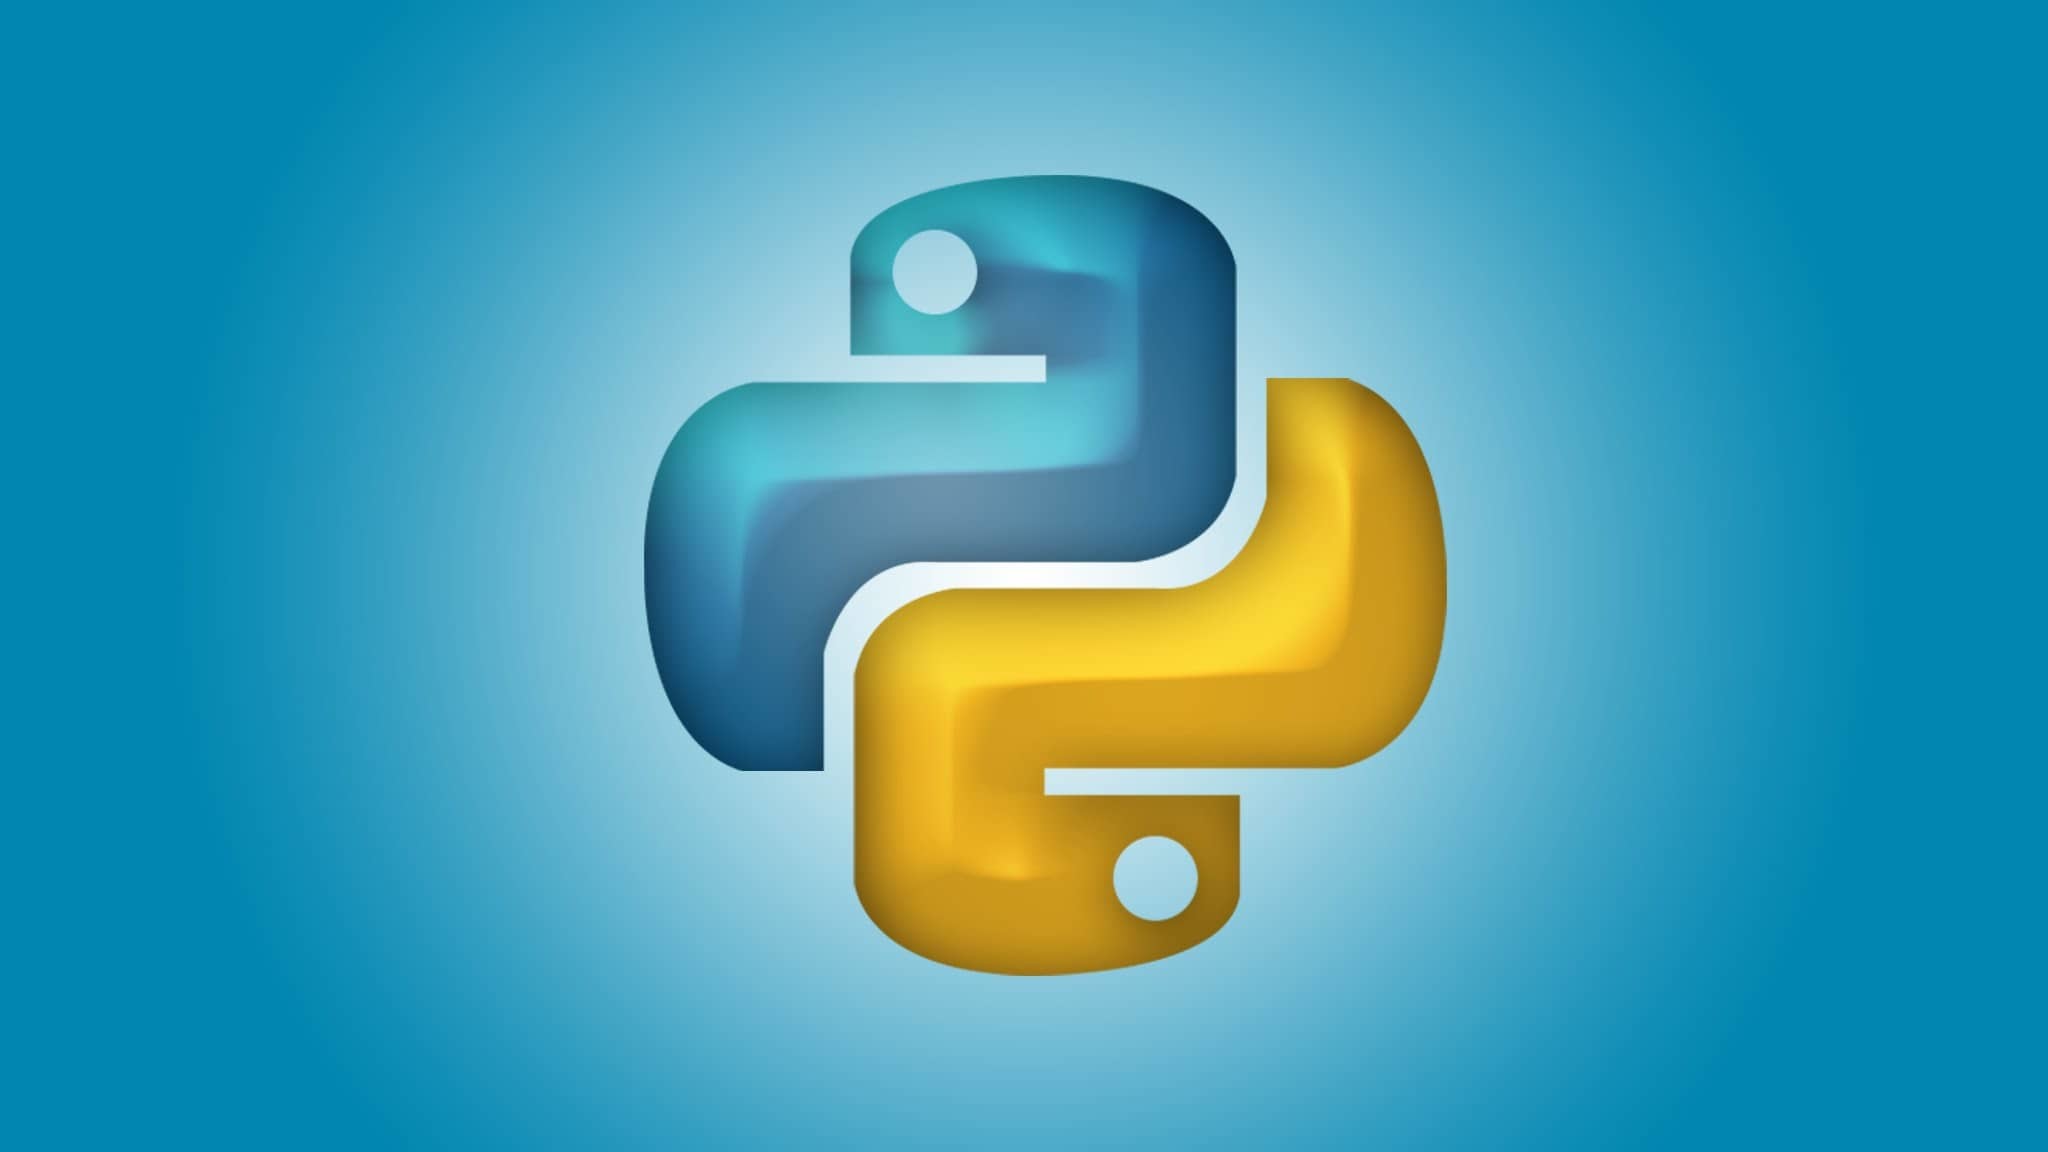 Top 30 Python Interview Questions for 2022 - InApps